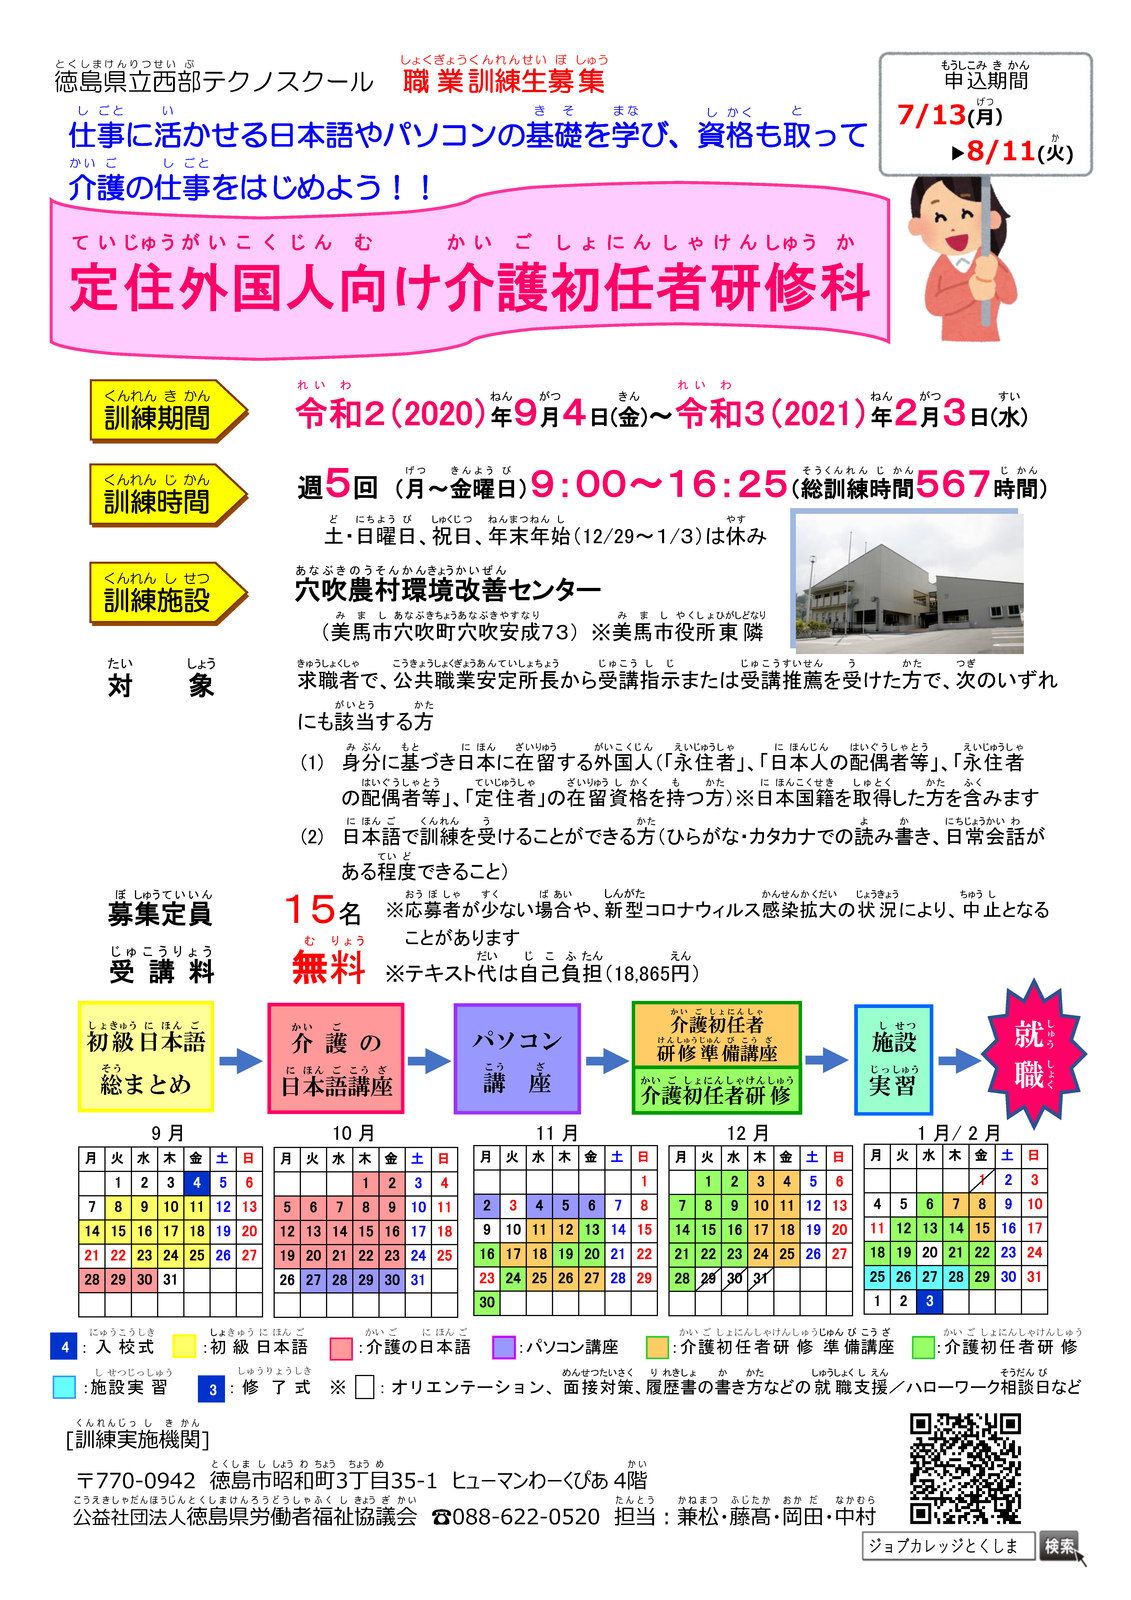 2020 Entry Level Caregiving Training Course for Permanent Residents in Western Tokushima01